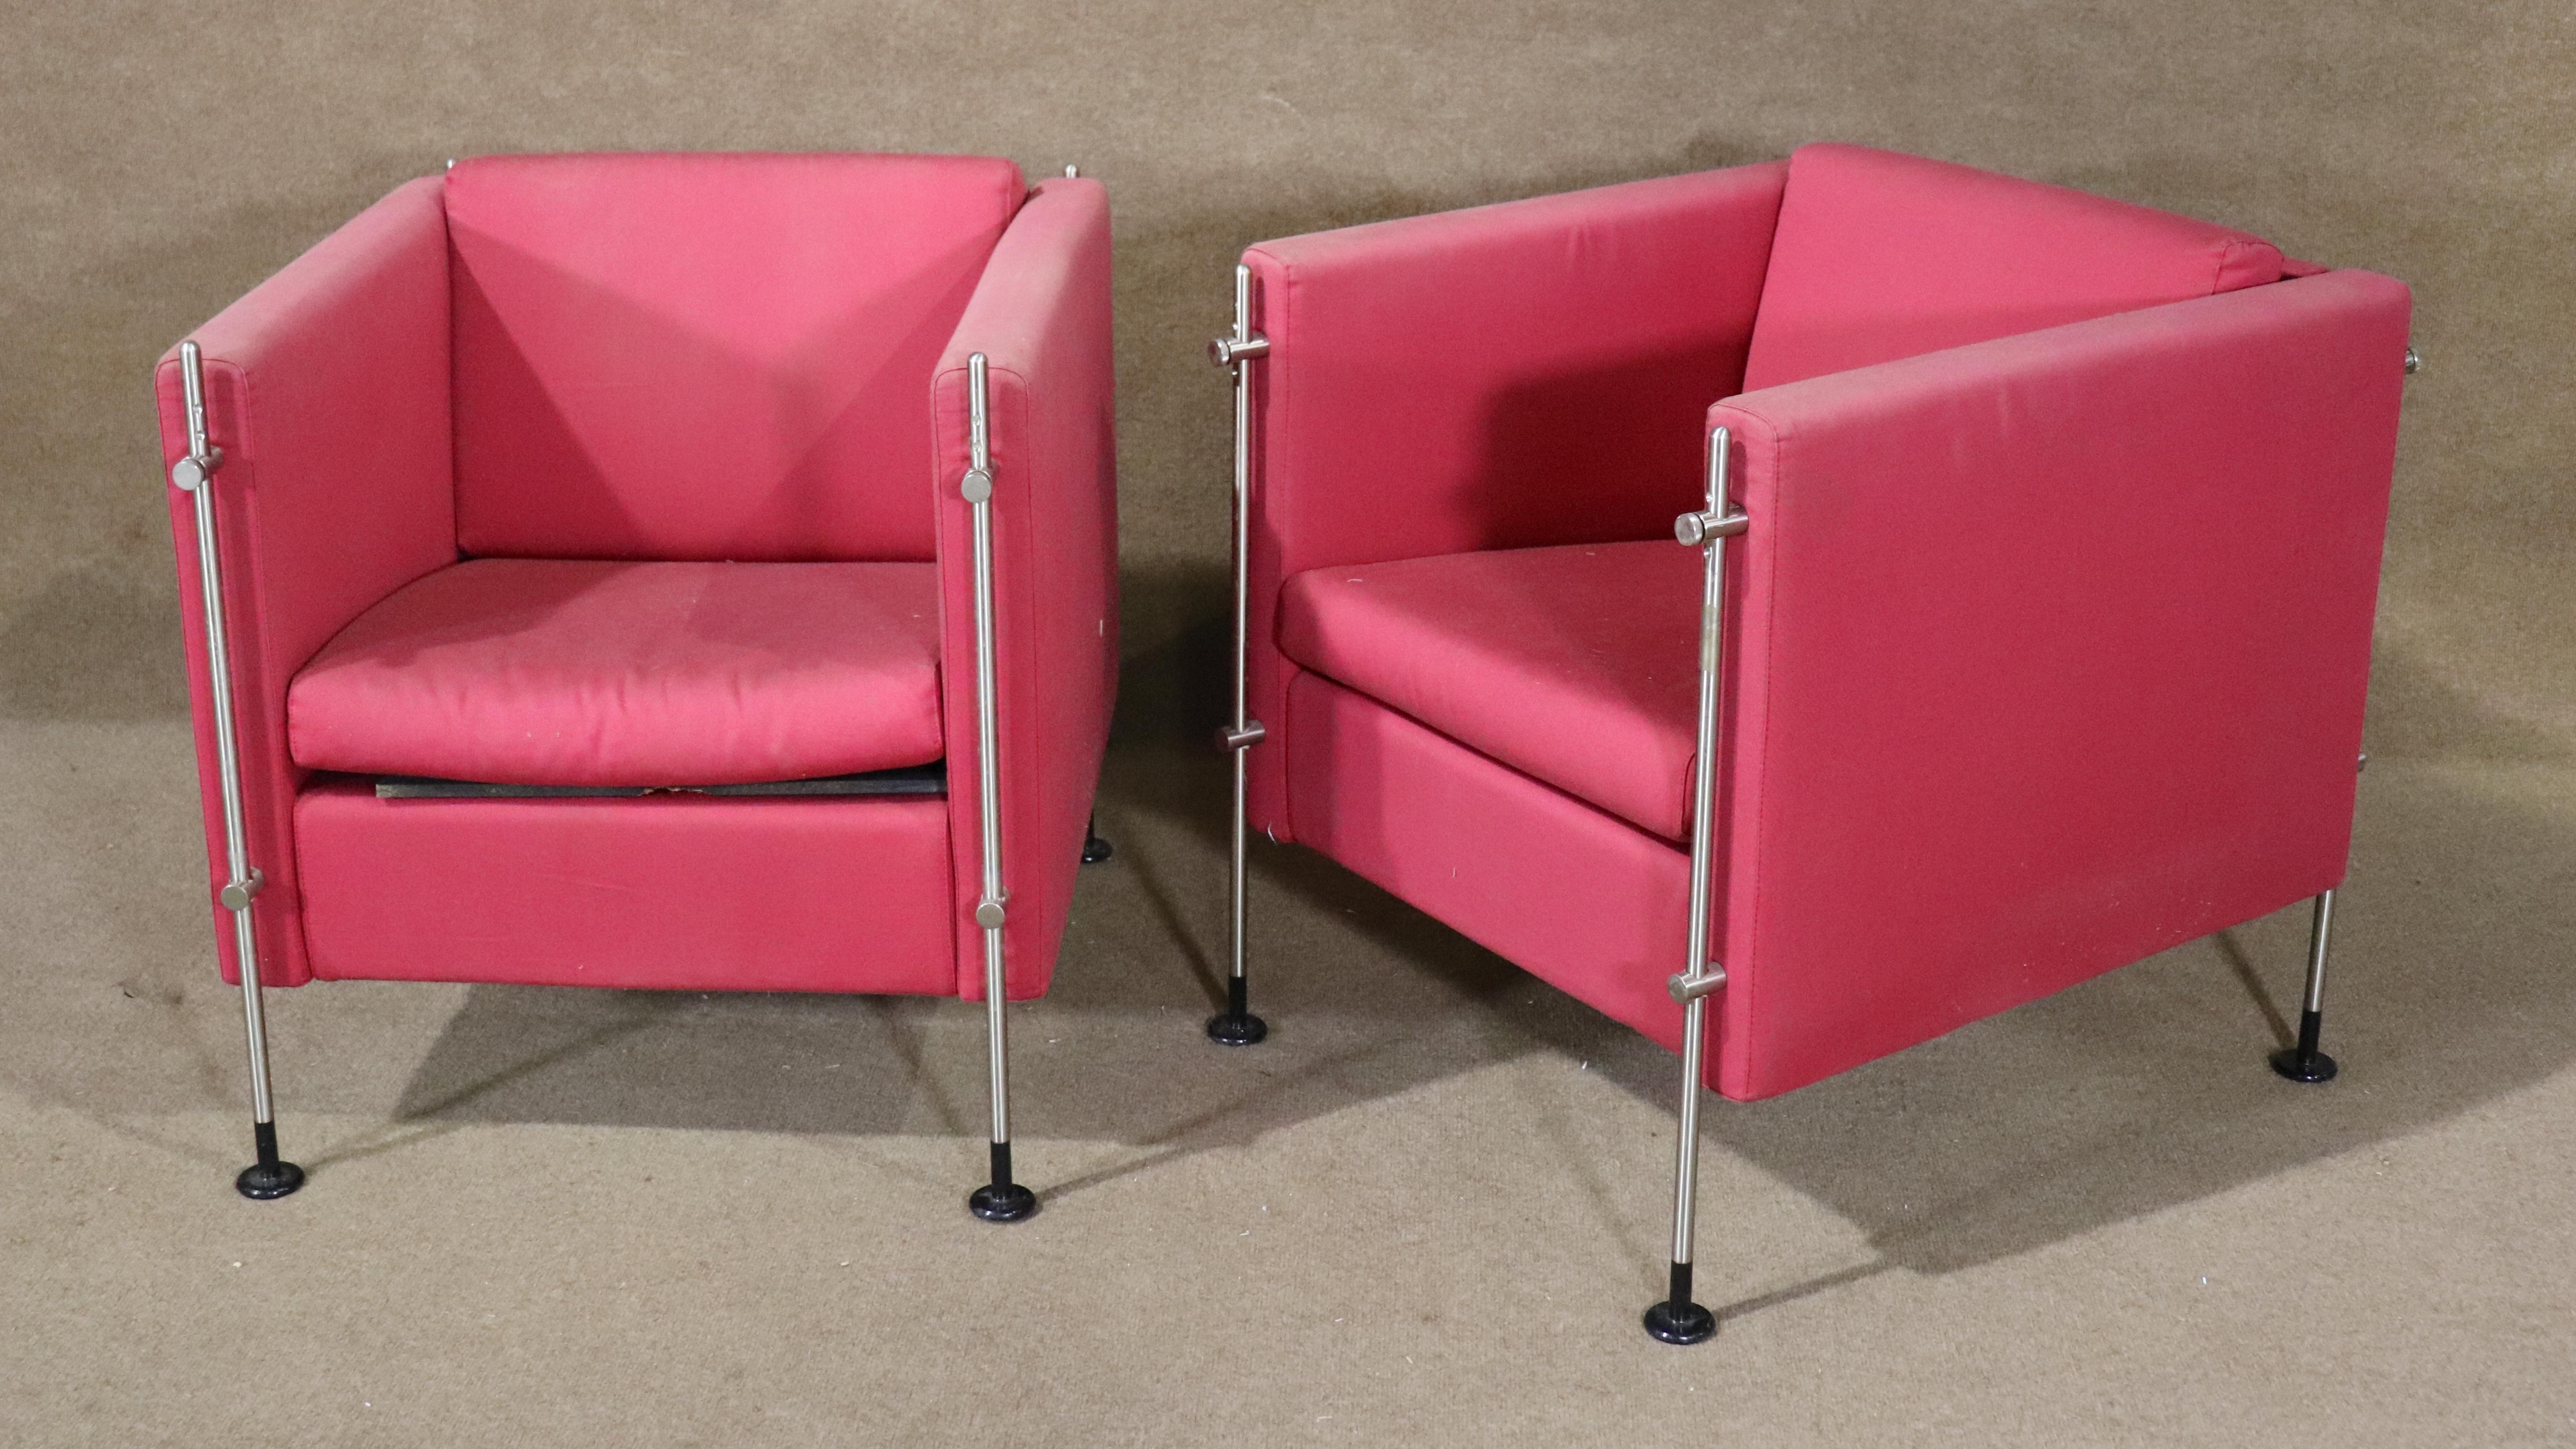 Designed by Burkhard Vogtherr for Italian furniture maker Arflex. Exposed metal frames give a modern style to these soft armchairs.
Please confirm location NY or NJ